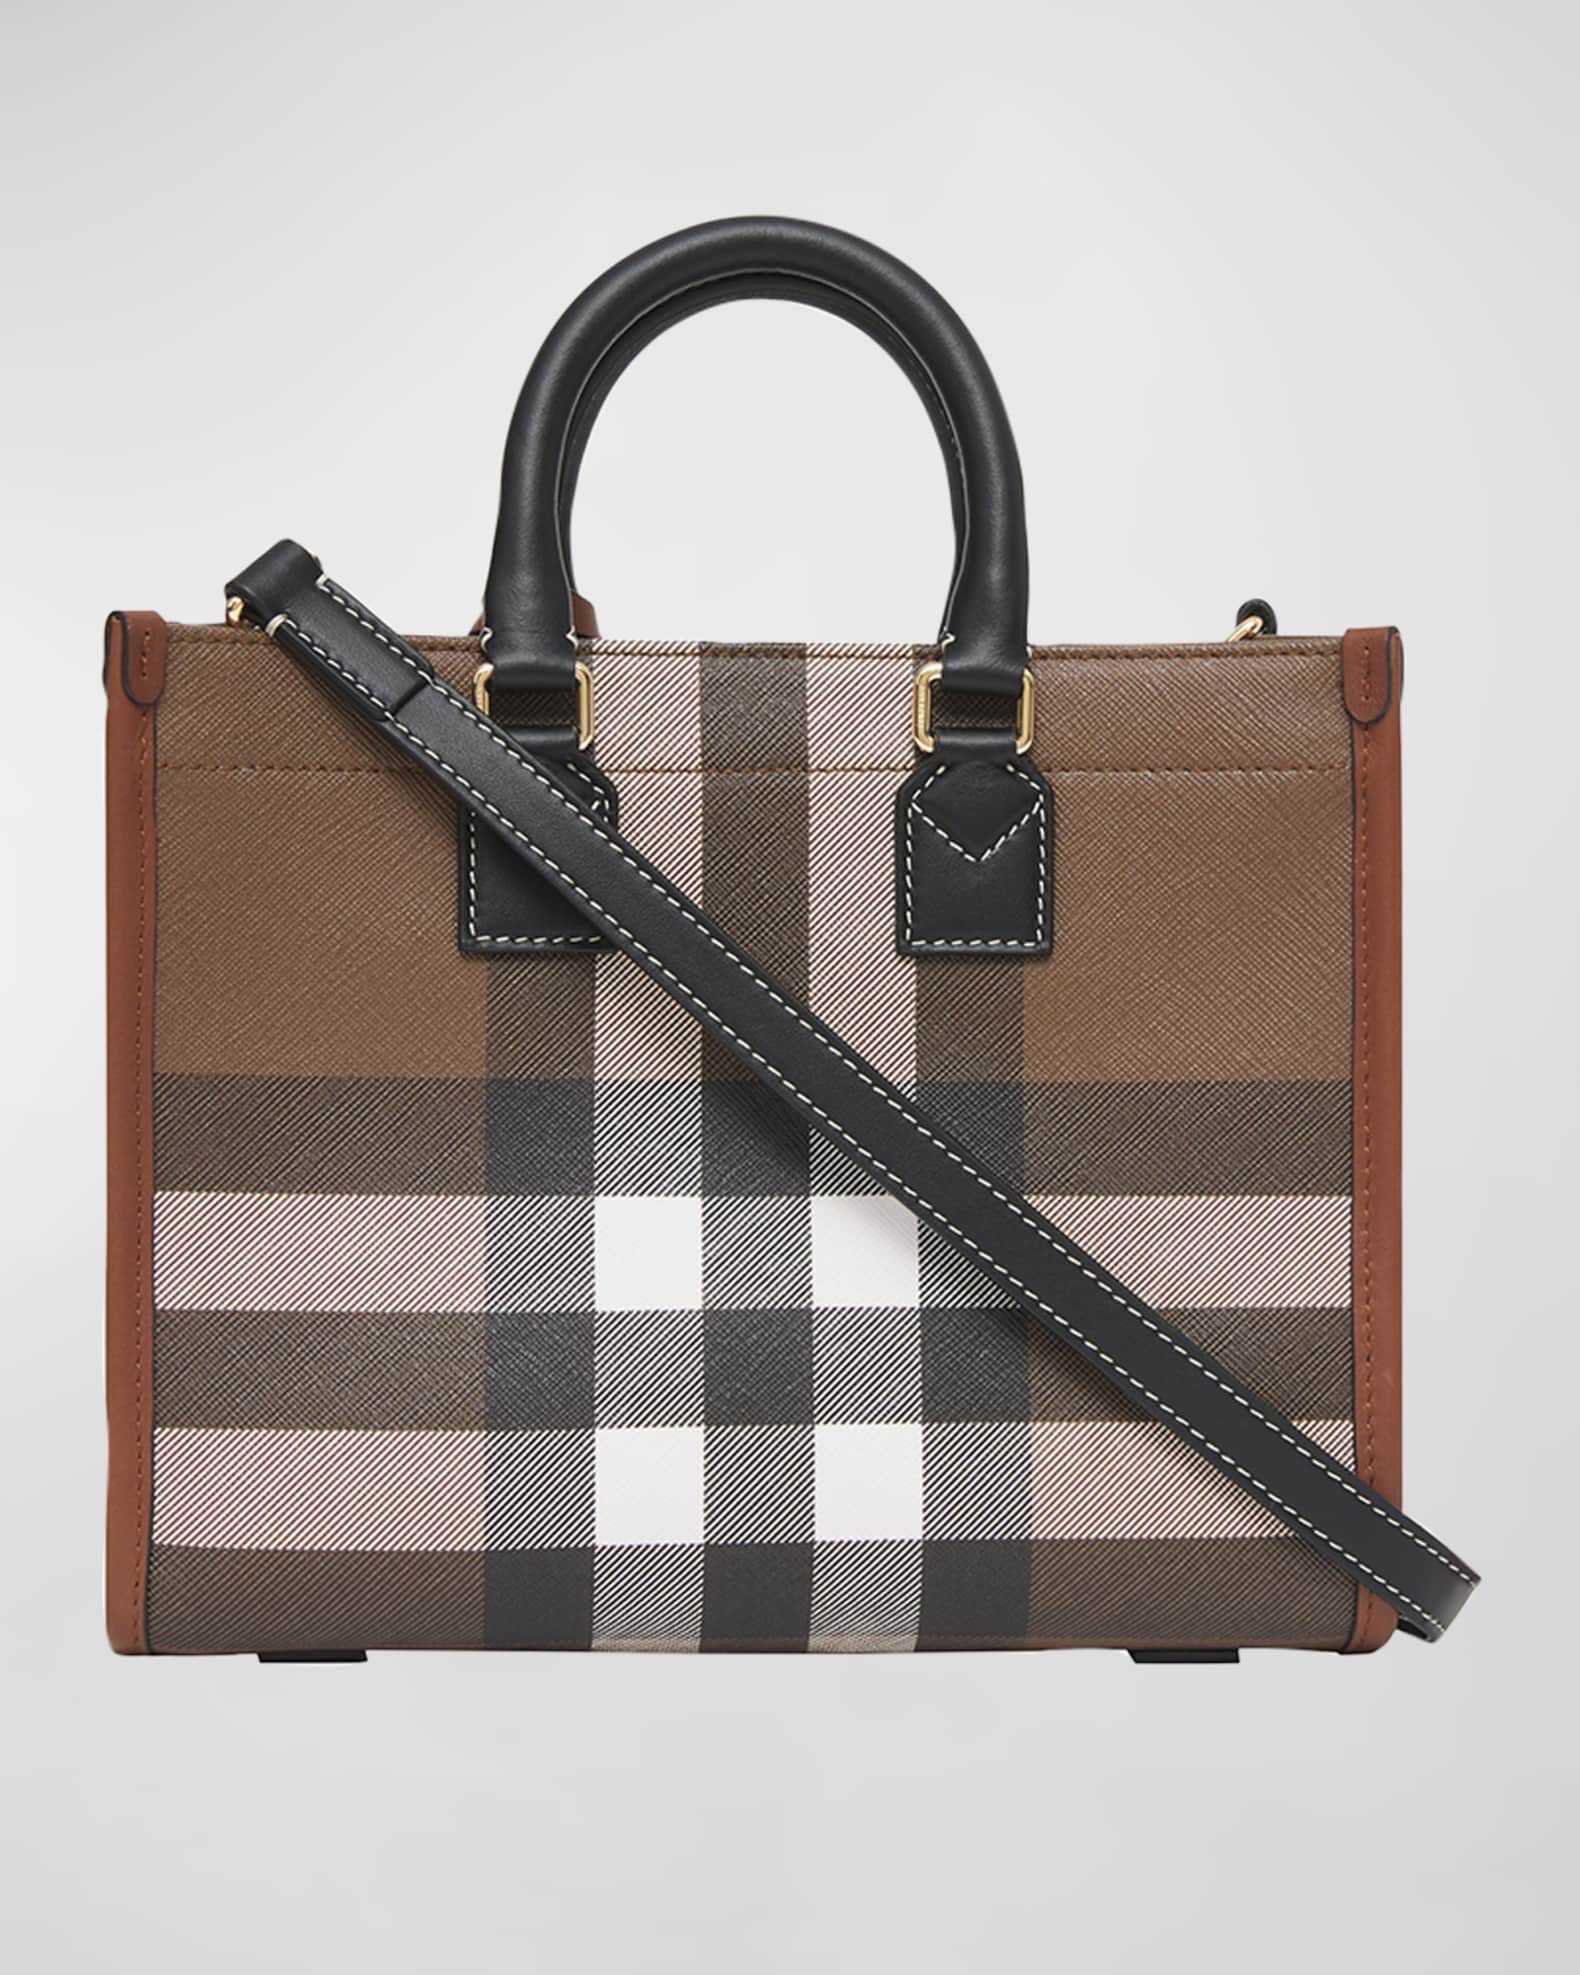 Burberry Canvas and Leather Two-Tone Freya Tote Bag - Neutrals - One Size